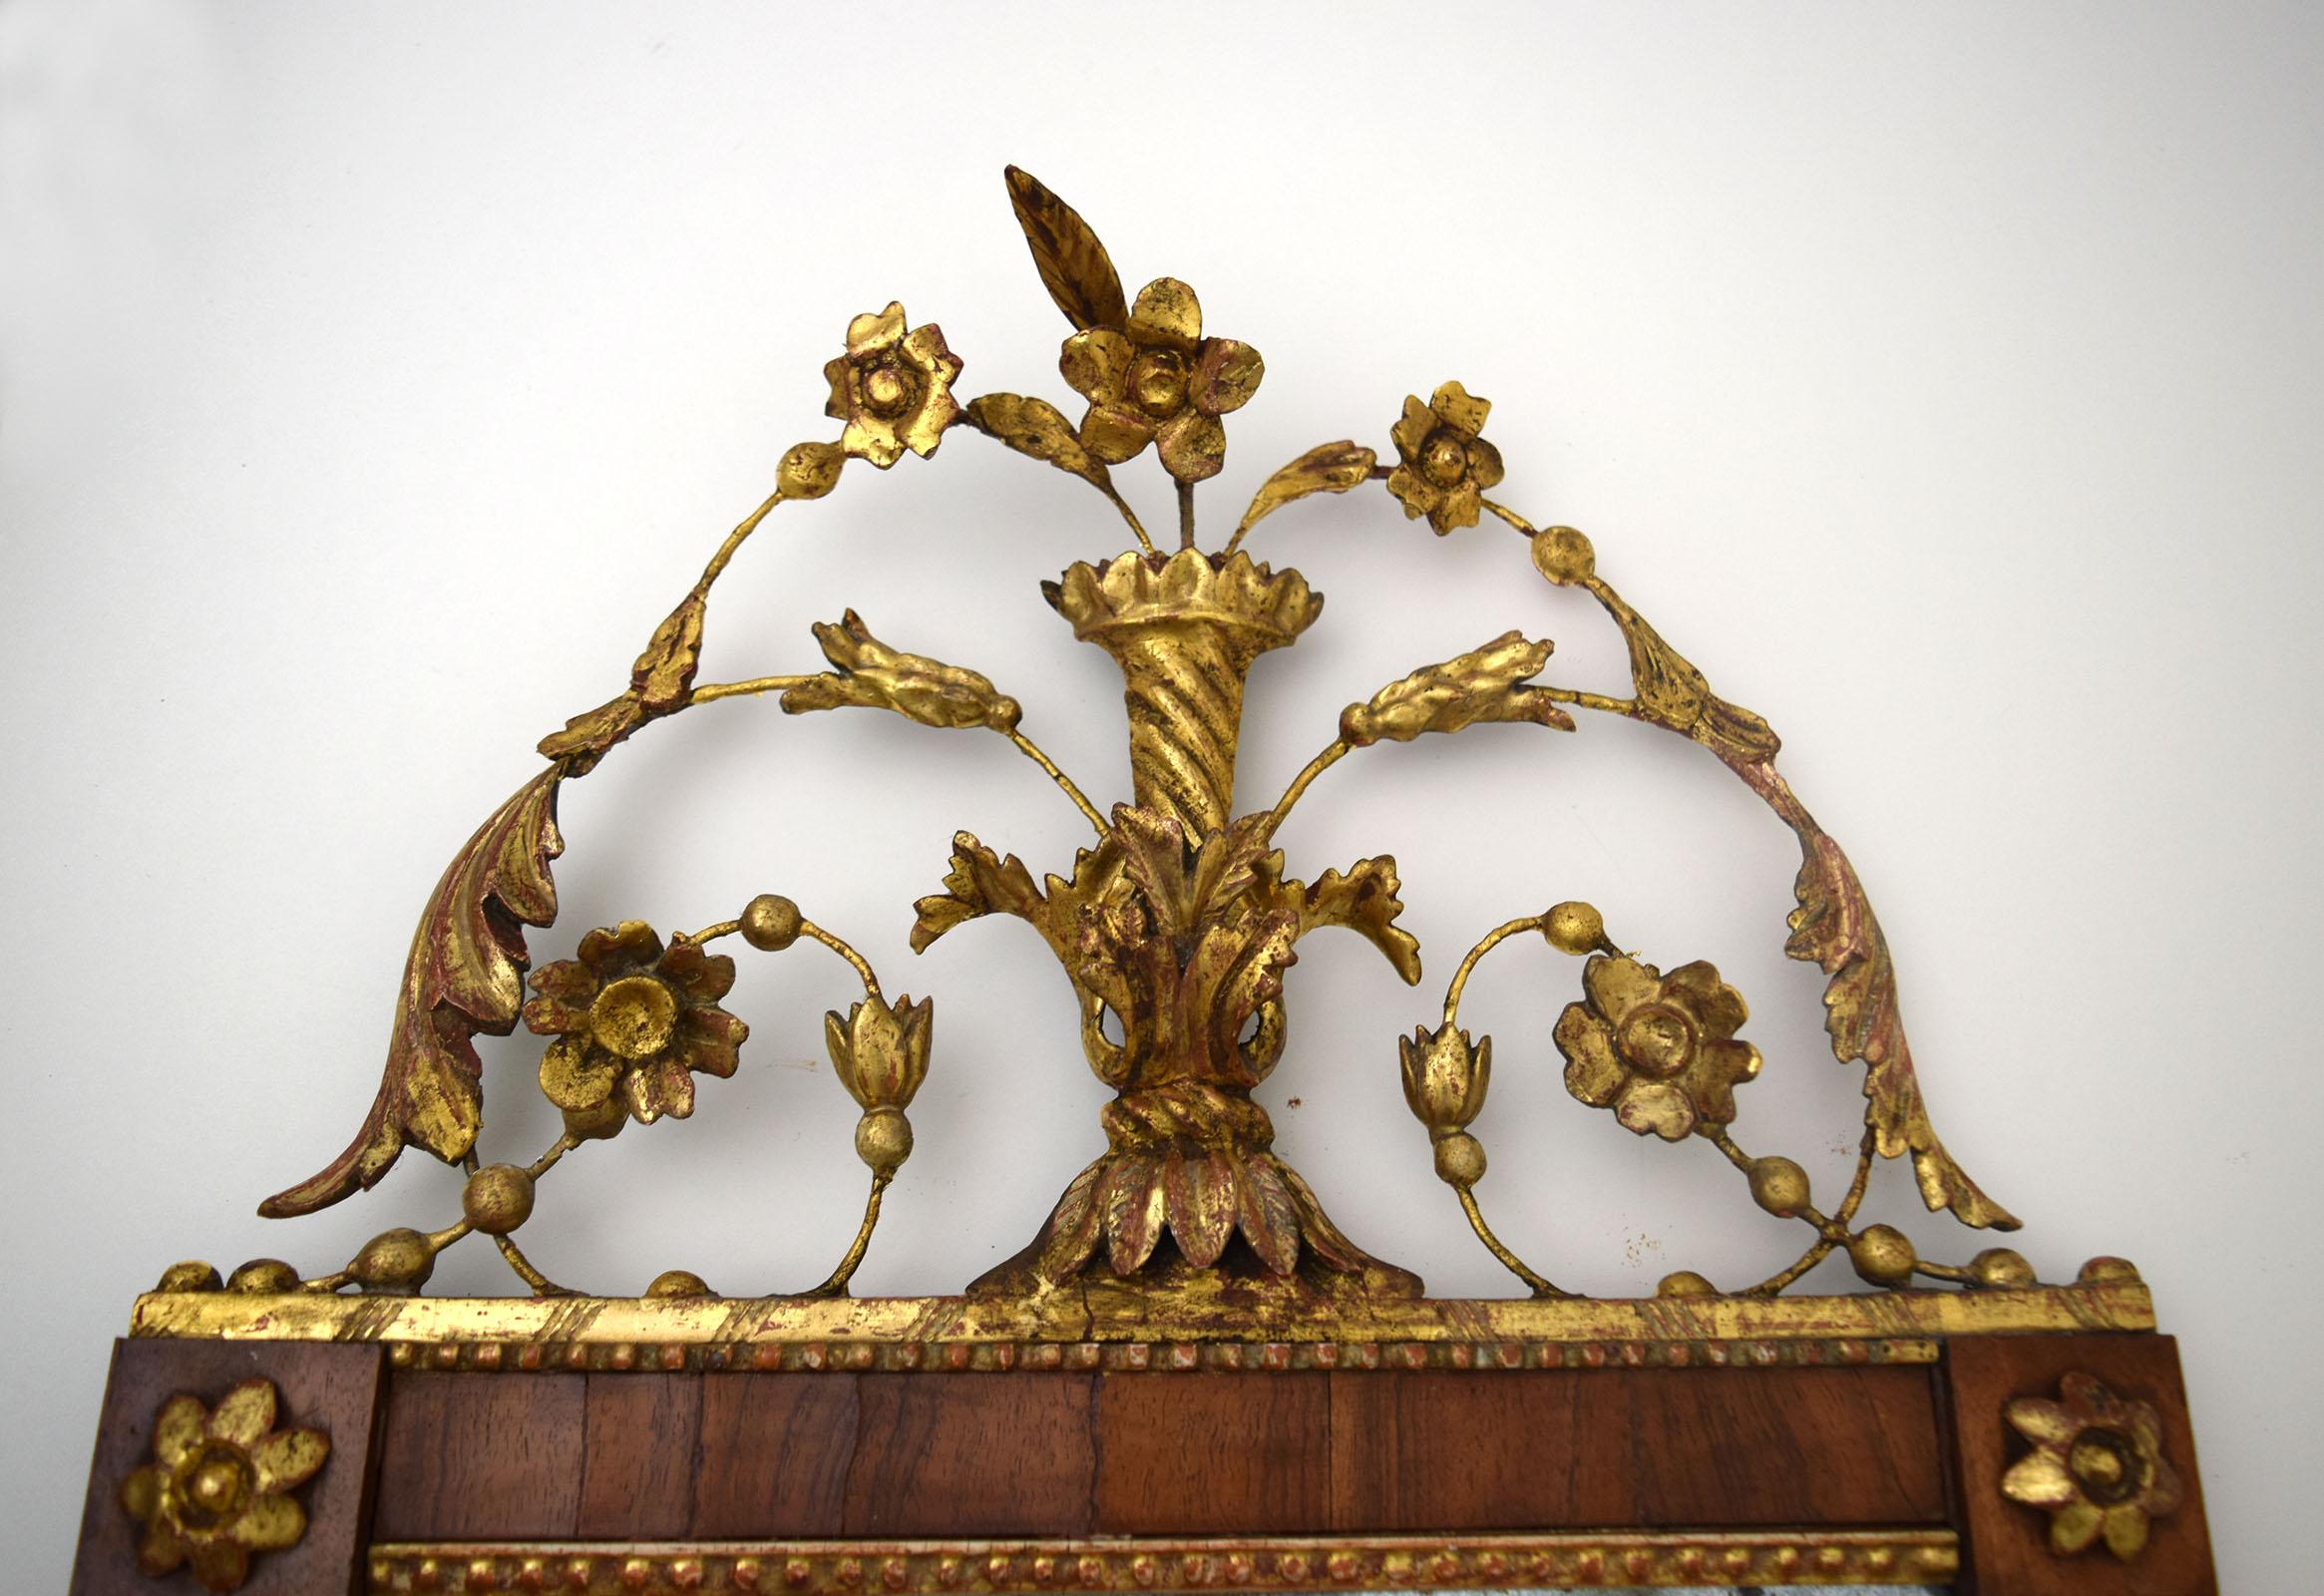 The so-called Bilbao mirrors were made circa 1800 in Portugal and Spain and named after the city where many were crafted. On our shores they’re often mistakenly said to be American, for the simple reason that some were found in old New England